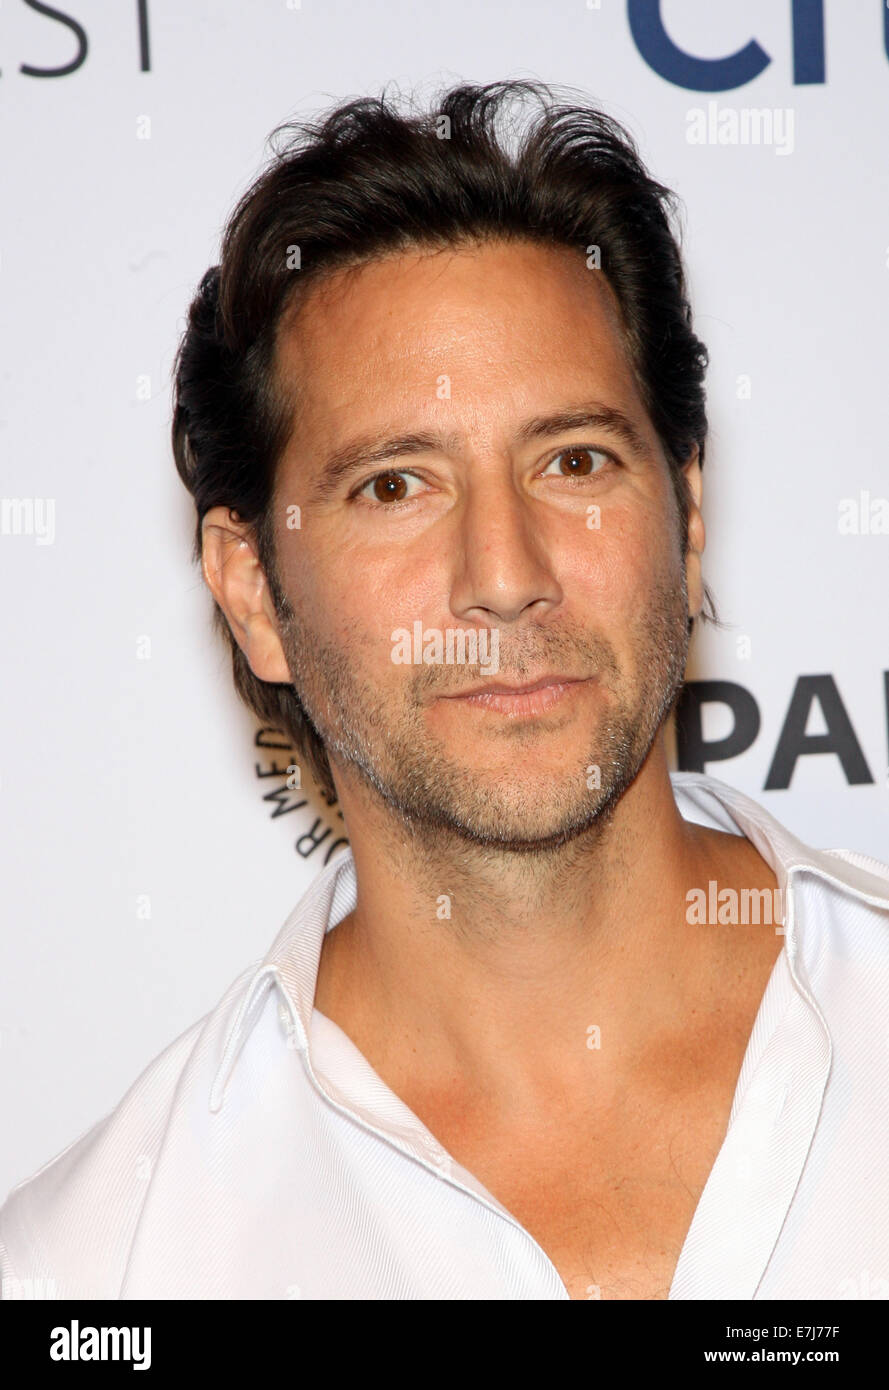 2014 PaleyFest - 'Lost' 10th Anniversary Reunion At Dolby Theatre  Featuring: Henry Ian Cusick Where: Hollywood, California, United States When: 17 Mar 2014 Stock Photo